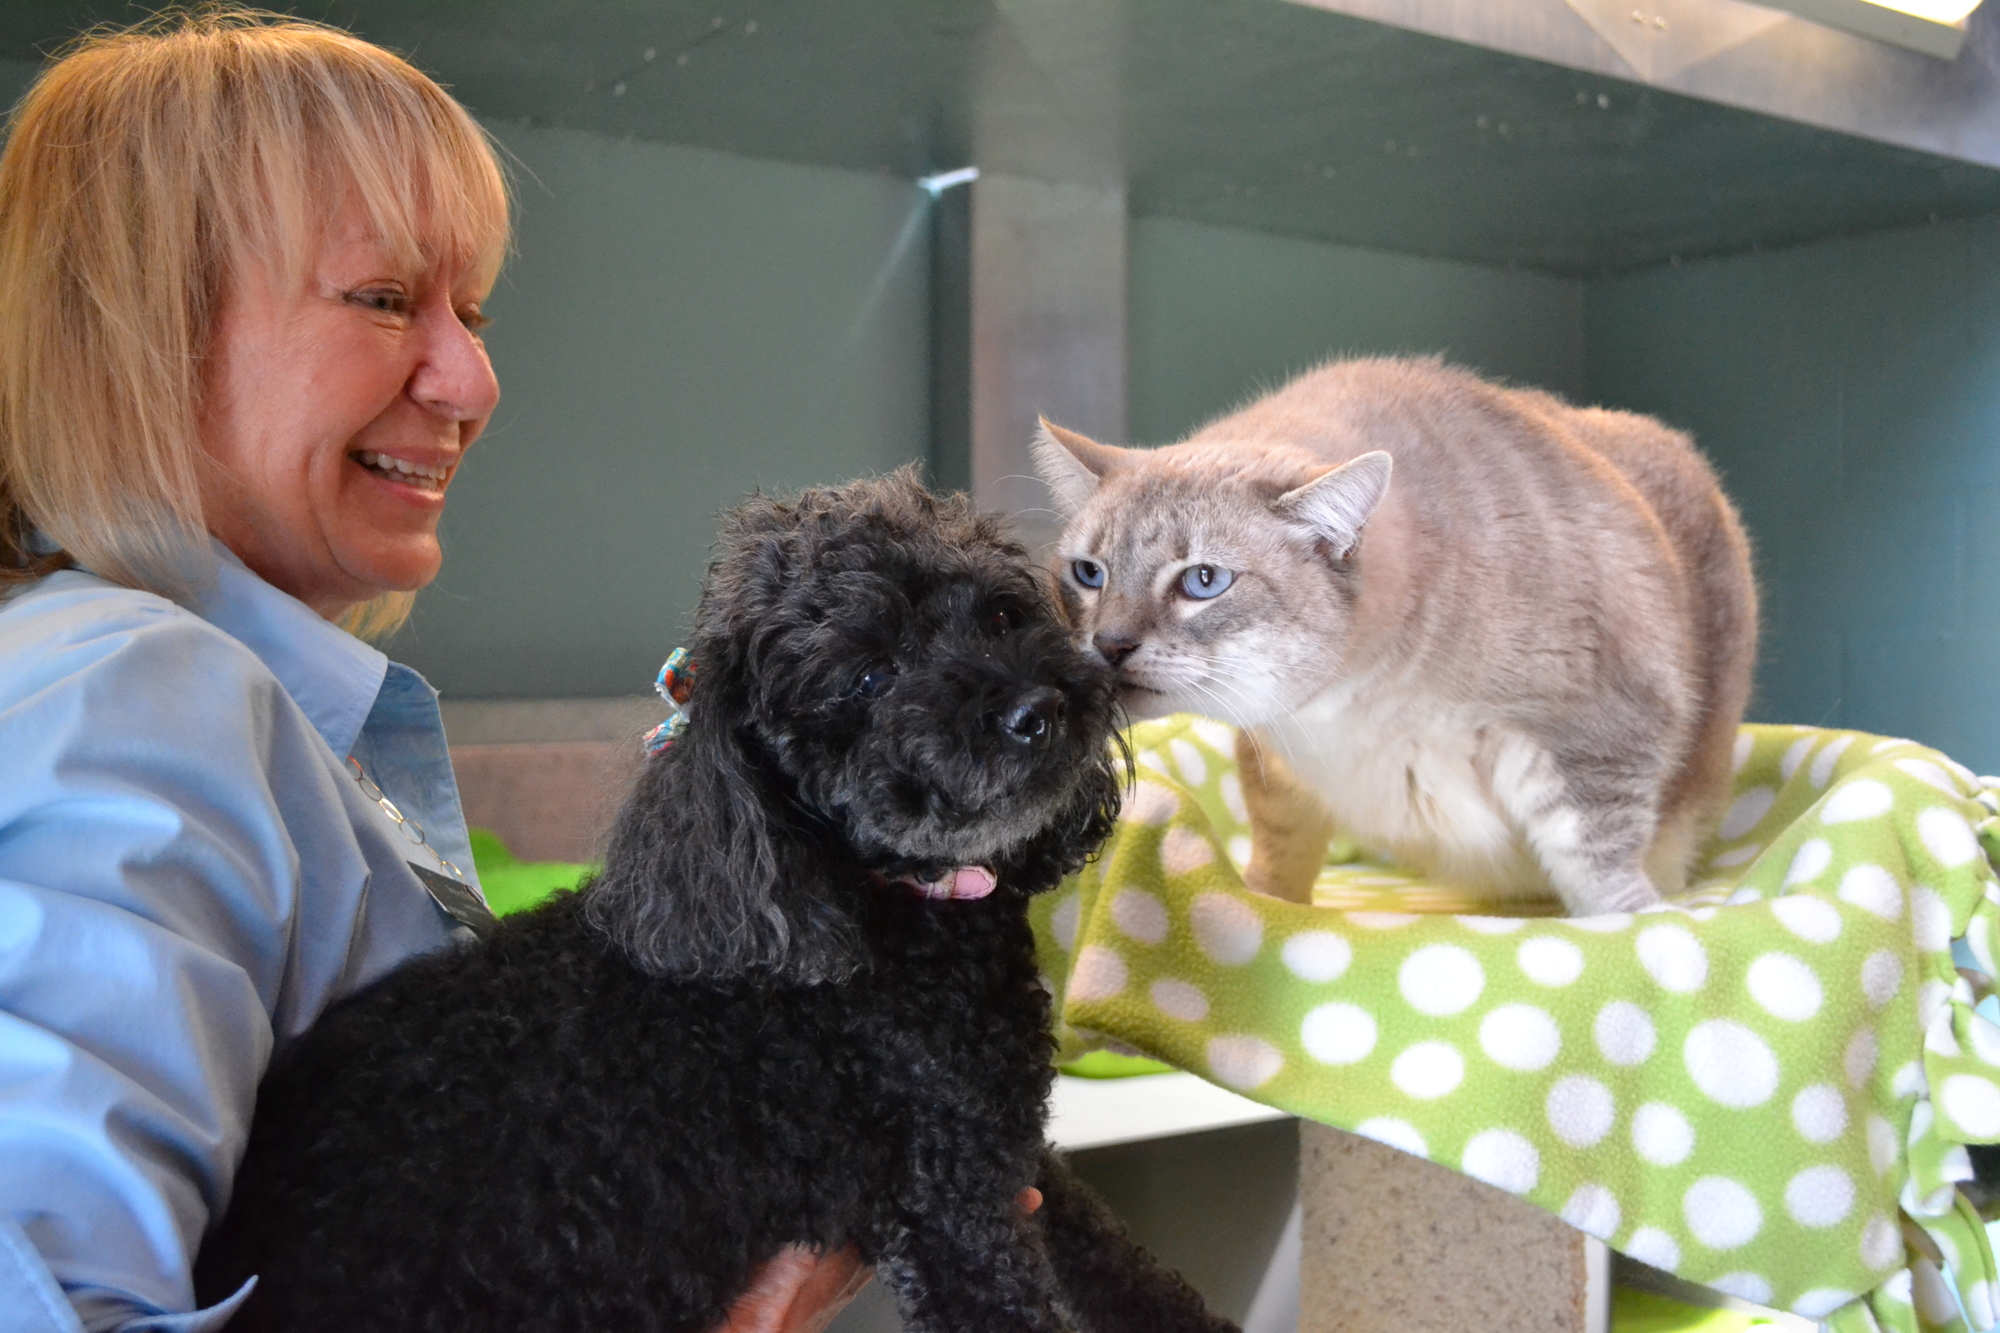 Cat Depot Executive Director Shelley Thayer lifts Mimi up to greet her pal Spice.